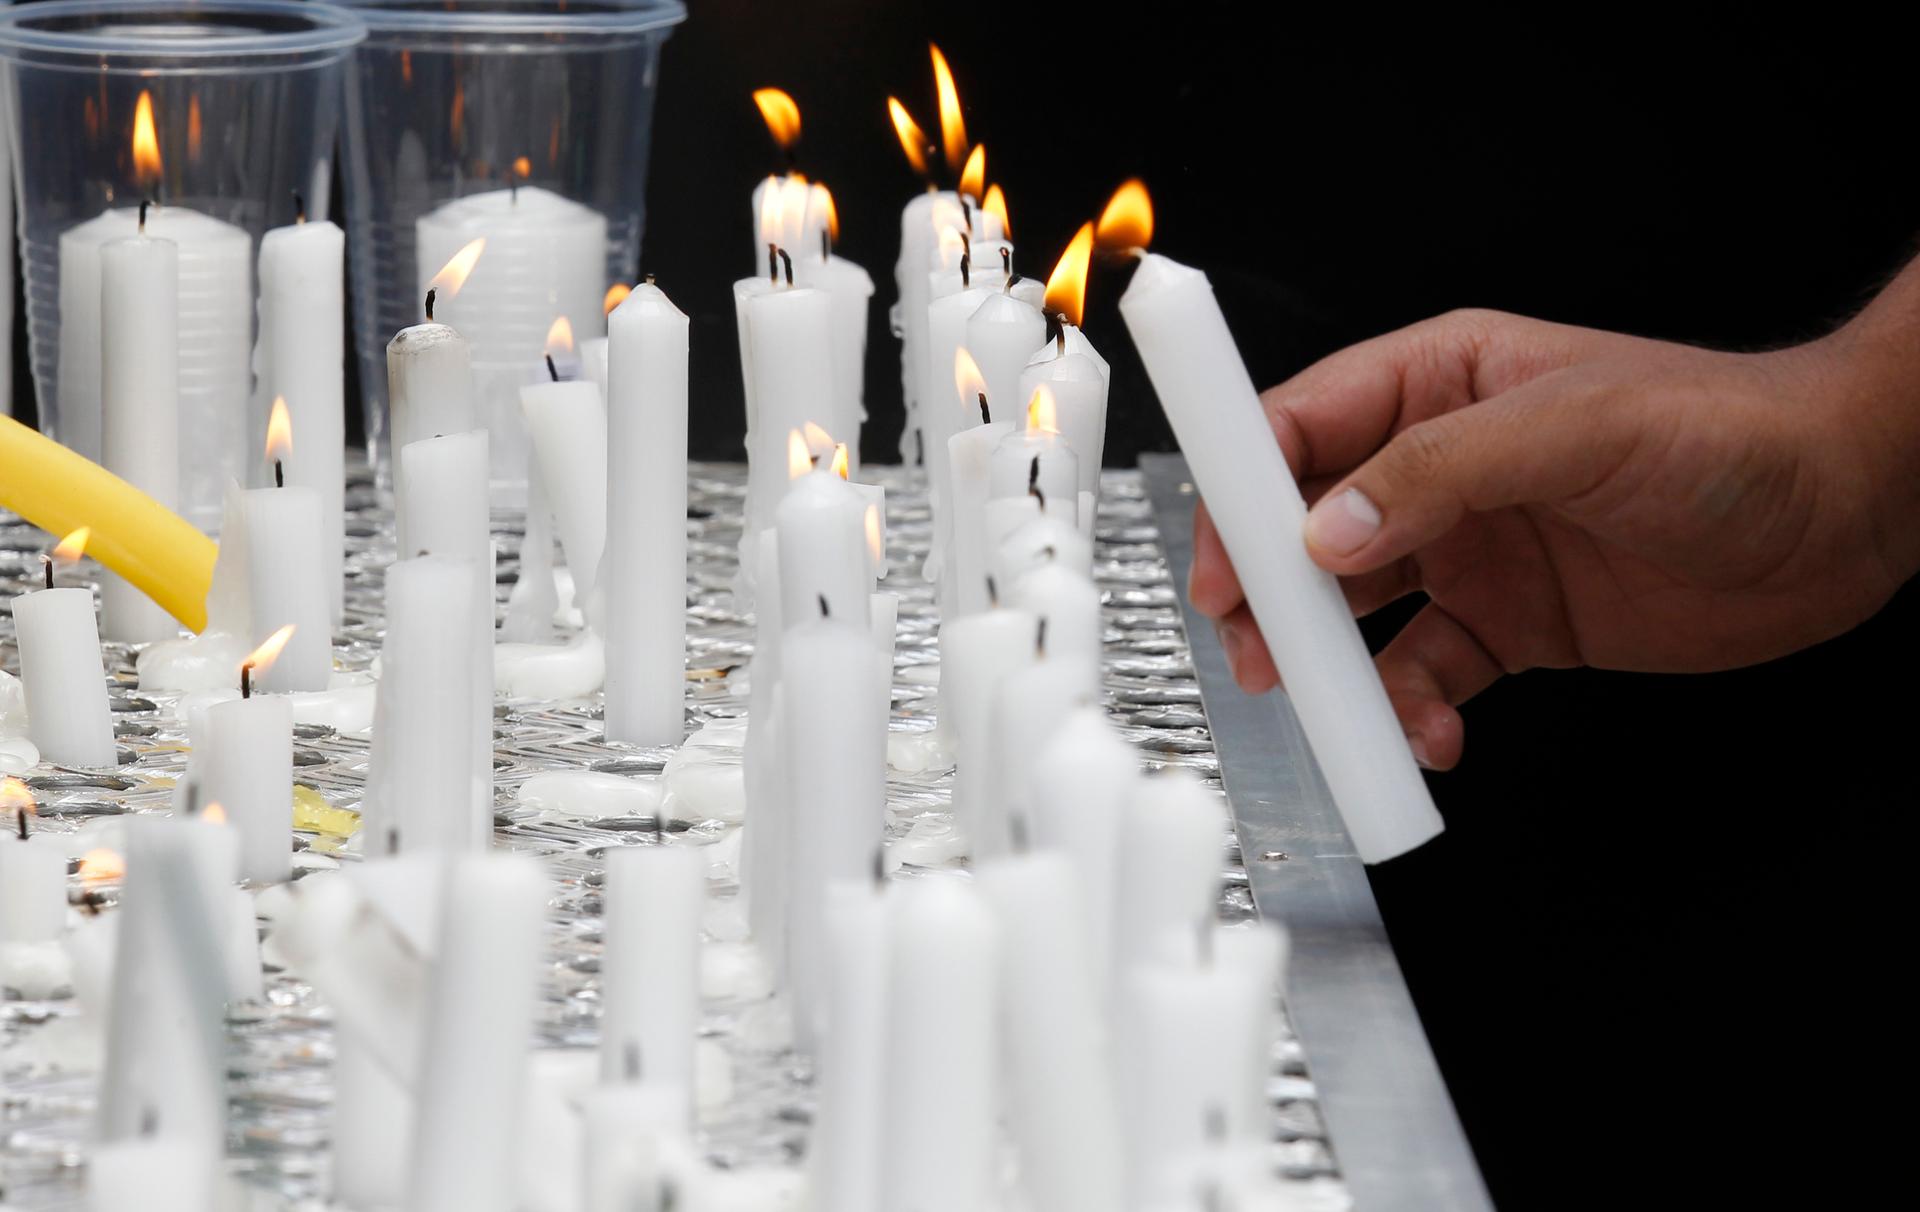 A relative of a victim lights a candle during the first anniversary memorial service of the Westgate shopping mall terrorist attack in Kenya's capital Nairobi on September 21, 2014.